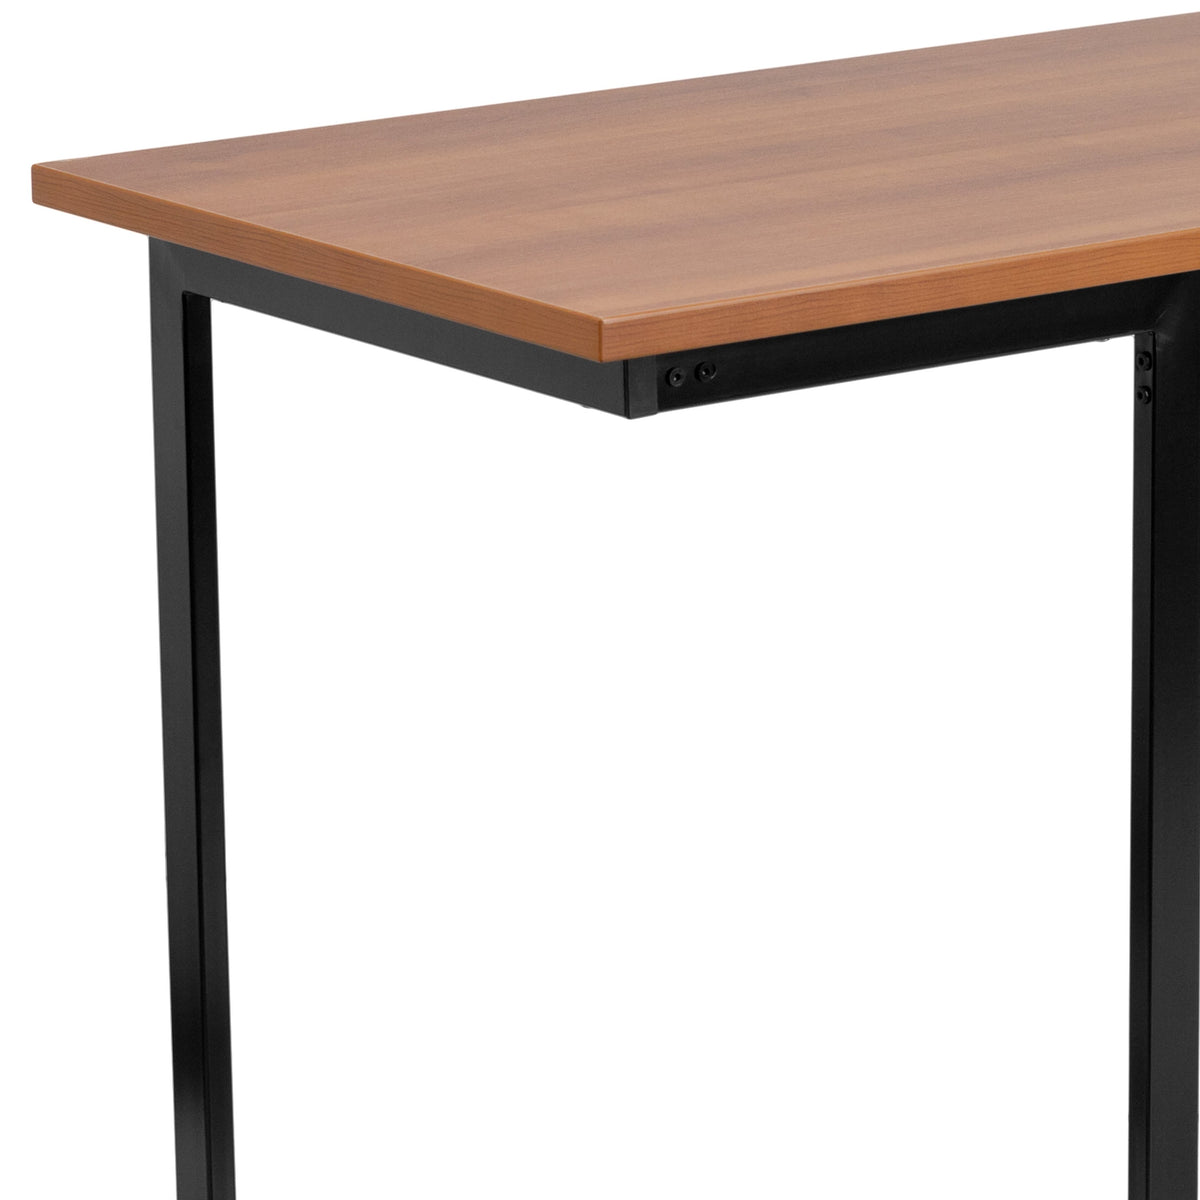 Cherry Computer Desk with Black Metal Frame - Office Furniture - Writing Desk